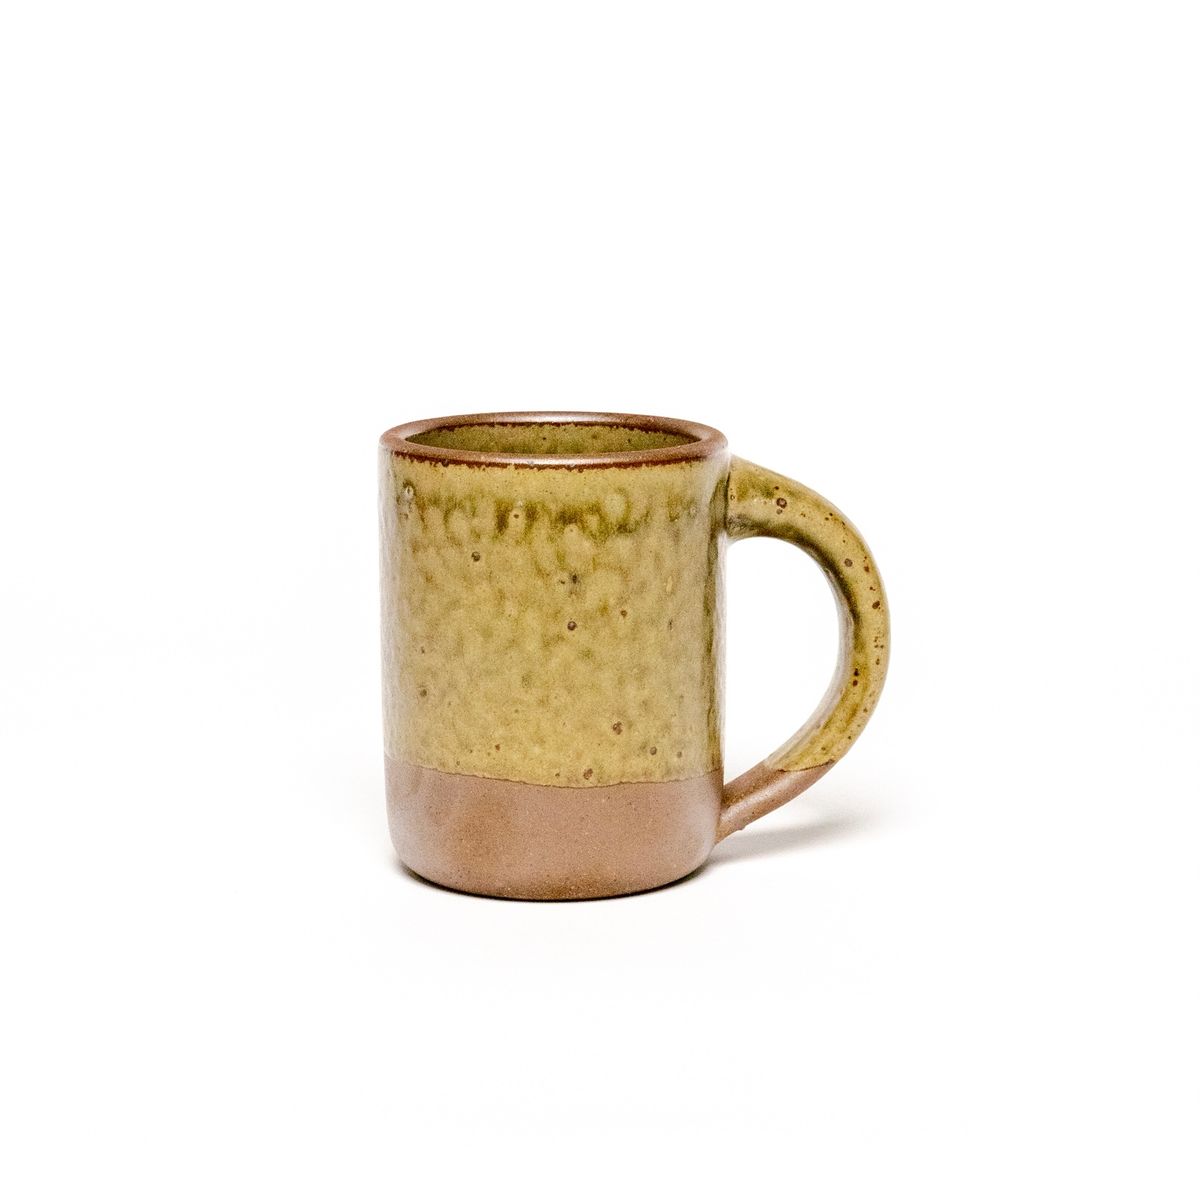 A medium sized ceramic mug with handle in an earthy green and brown color featuring iron speckles and unglazed rim and bottom base.